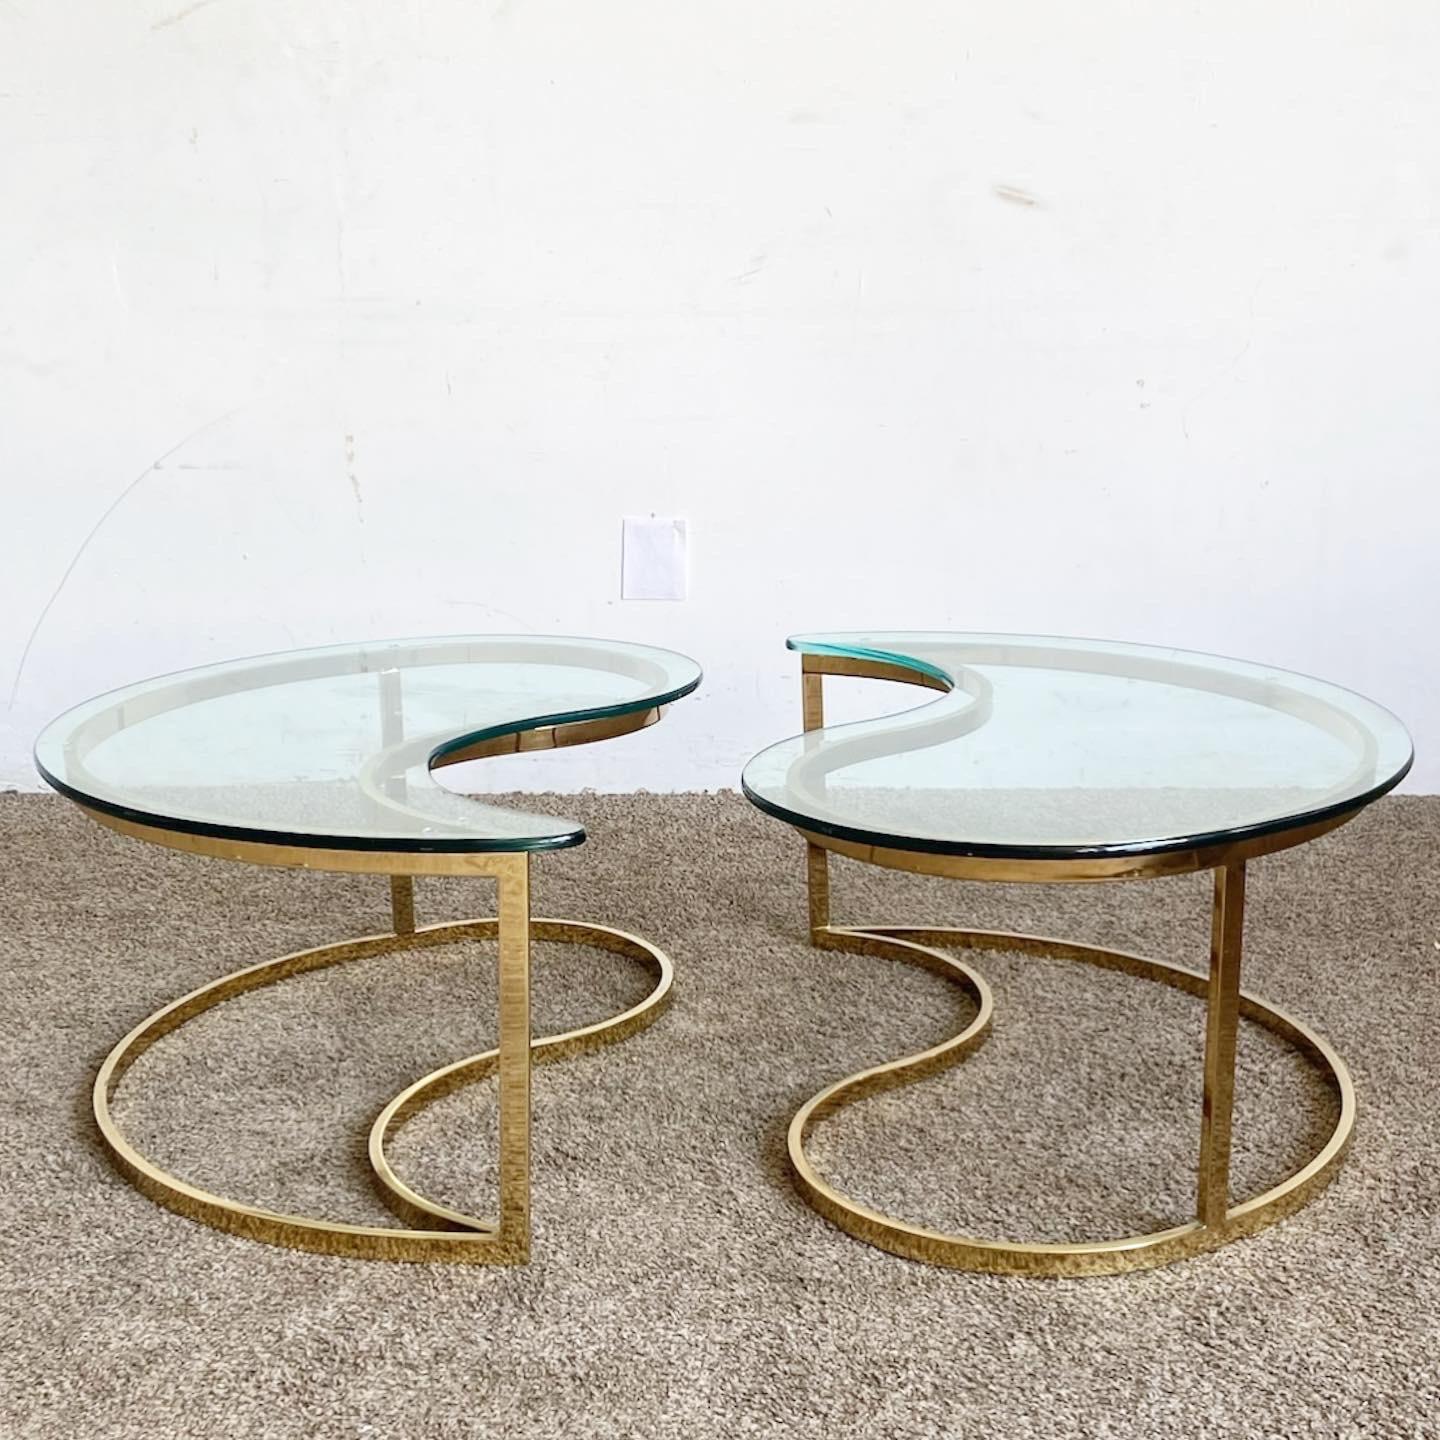 Introduce opulence and balance into your living space with this Hollywood Regency Golden Tear Drop Glass Top Coffee Table Set. Versatile in form and rich in style.
Minor pitting to the Golden Teardrop Coffee Tables as seen in the photos.